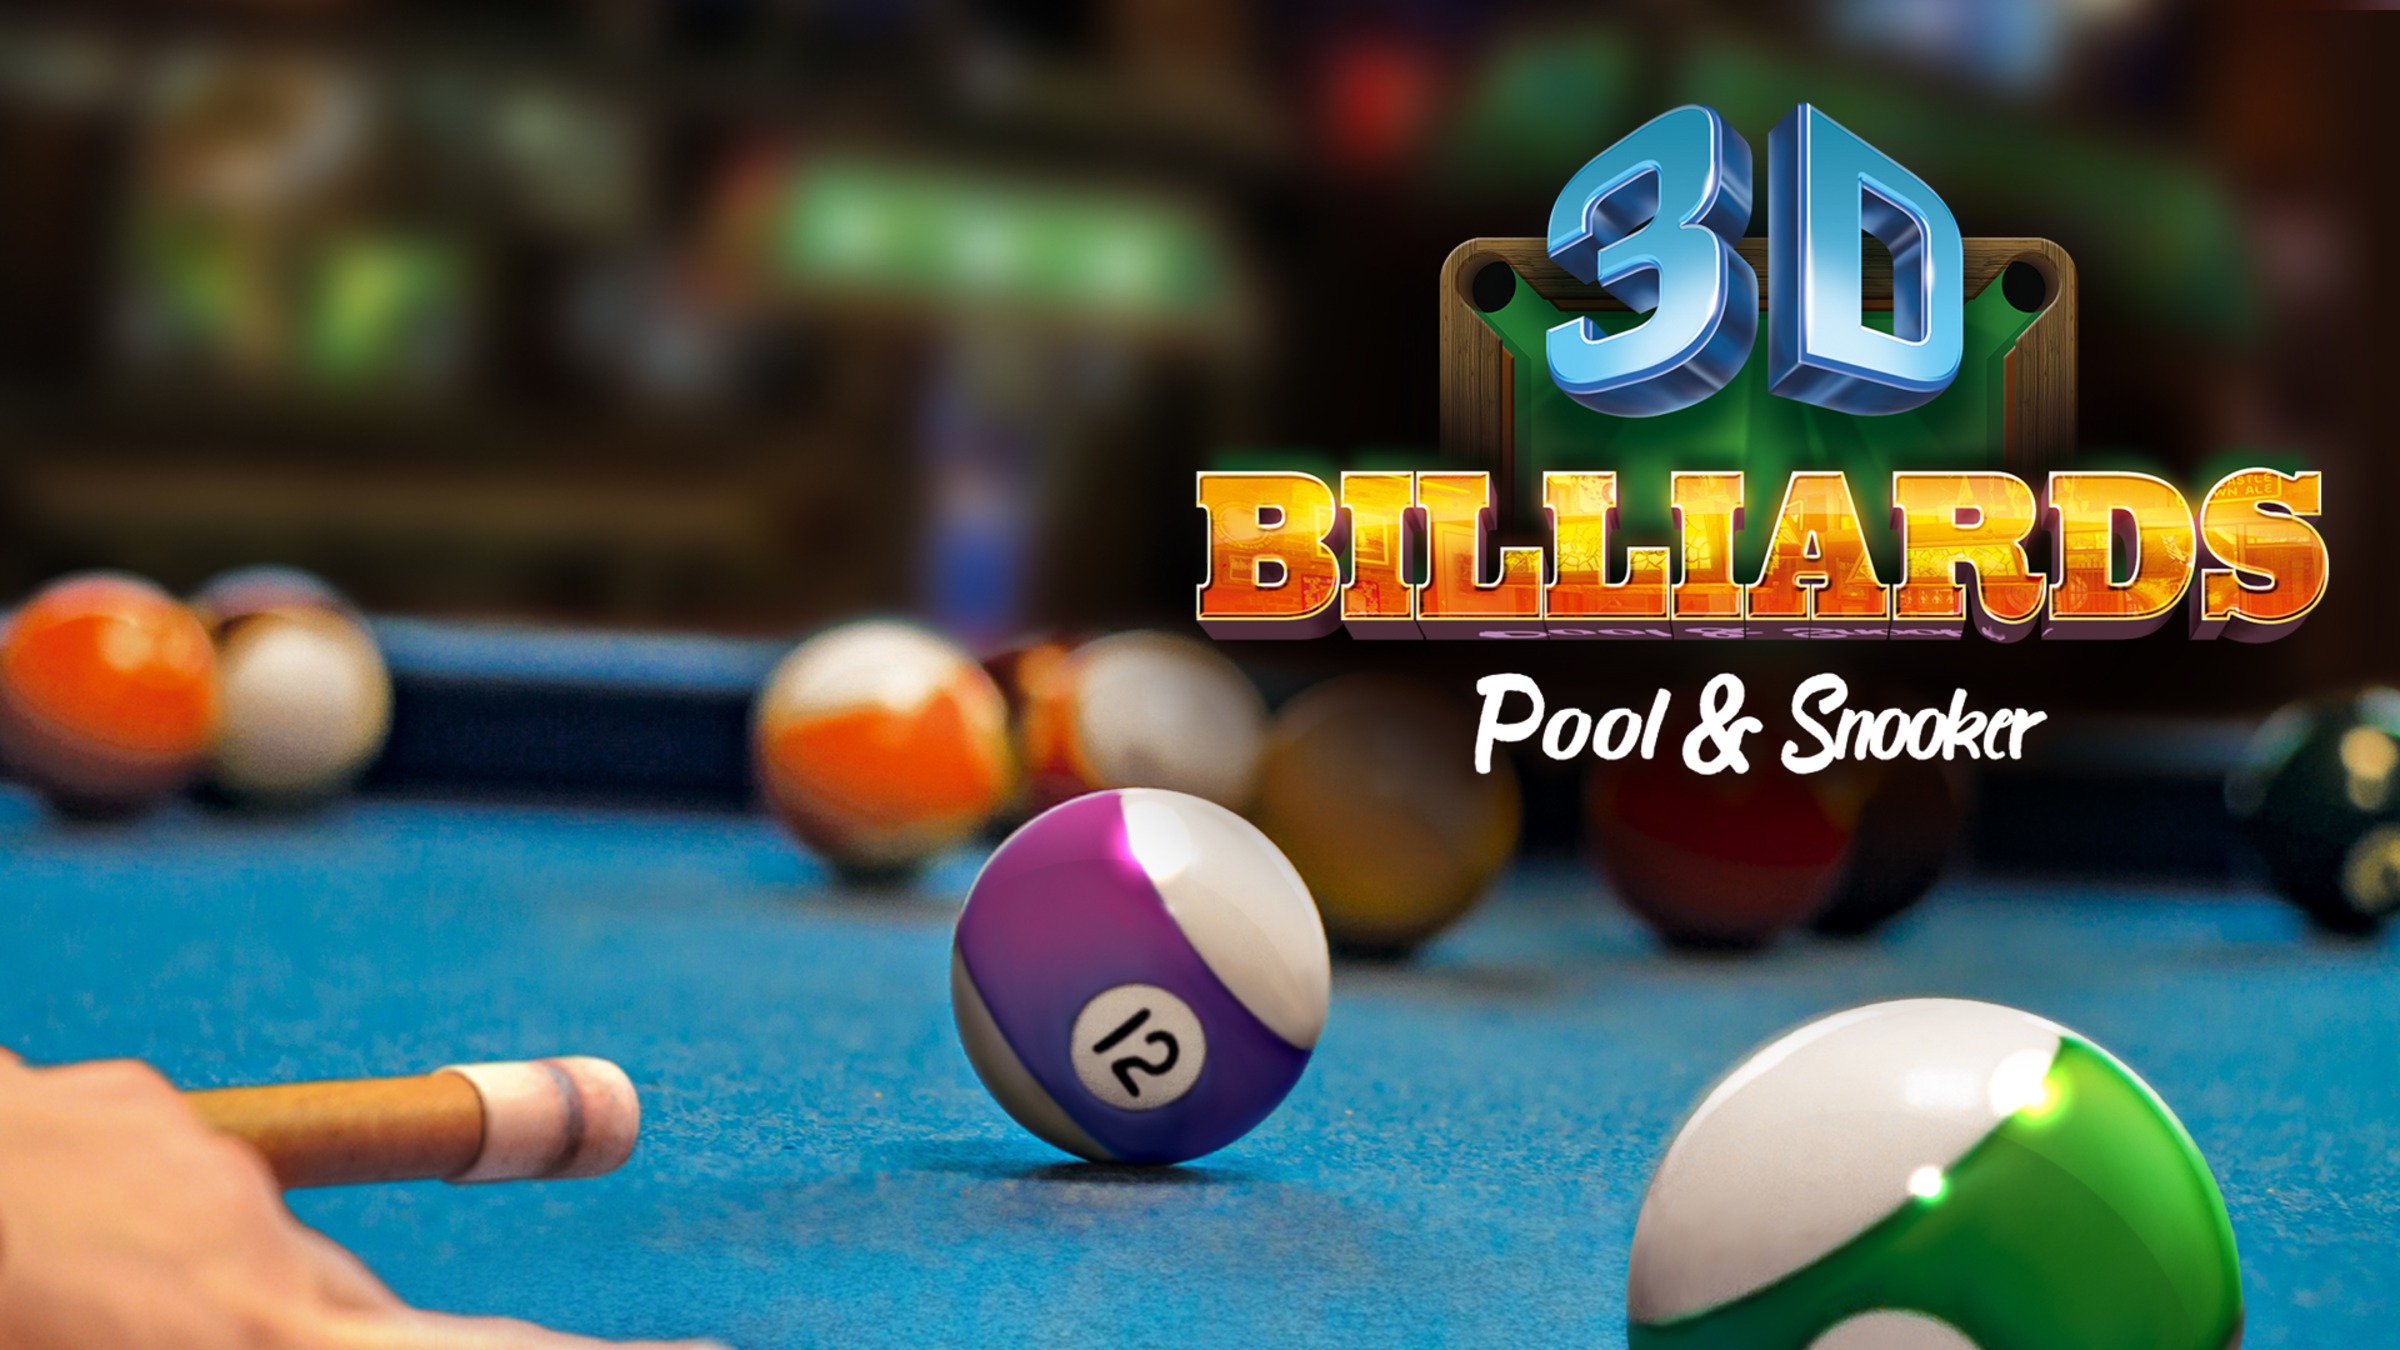 3D Billiards - Pool & Snooker for Nintendo Switch - Nintendo Official Site